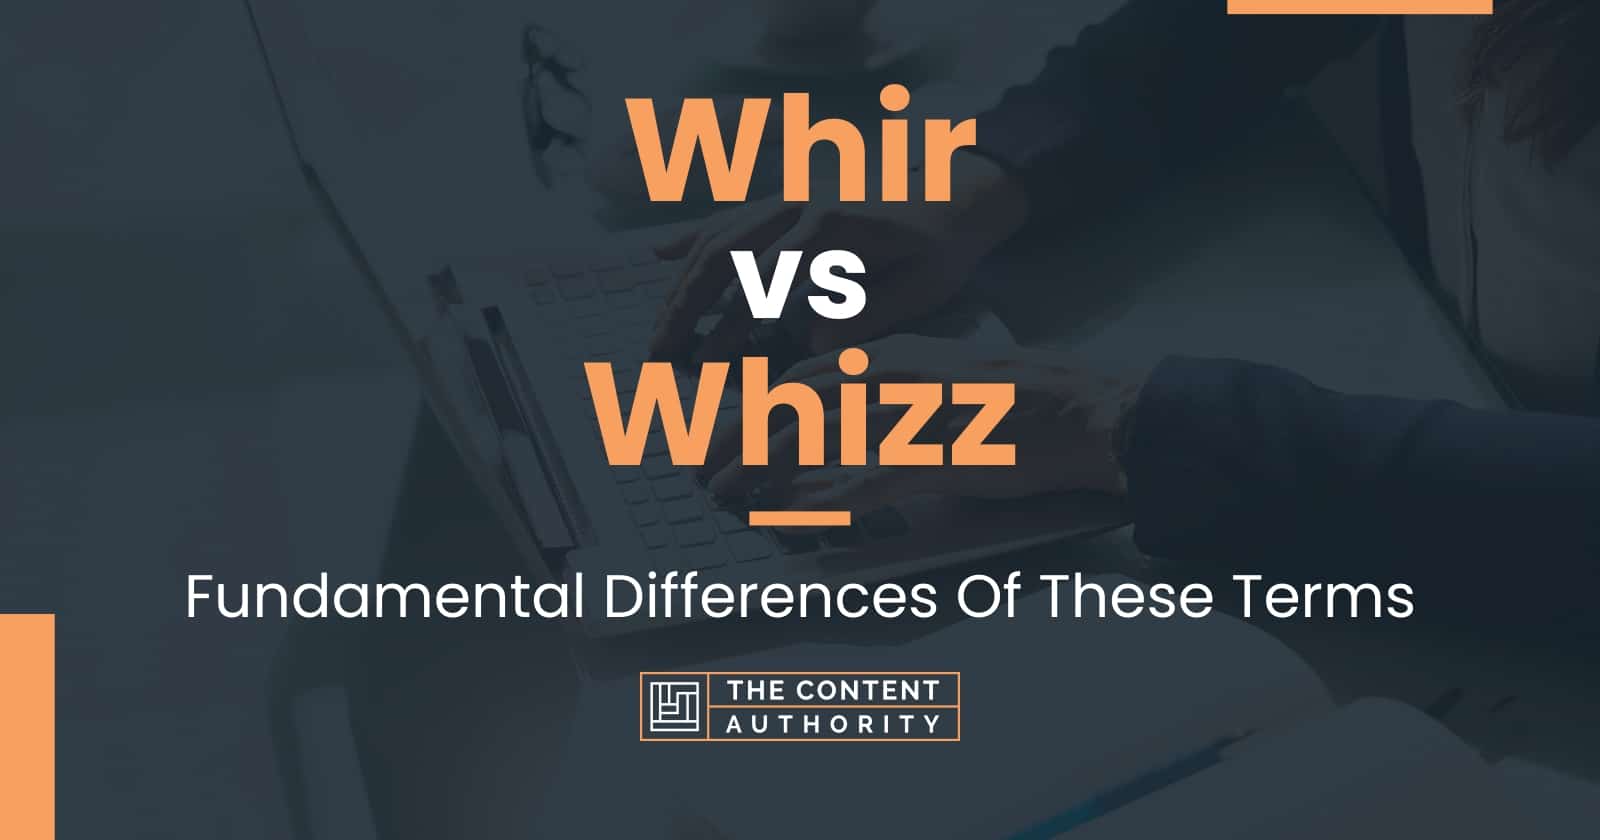 Whir vs Whizz: Fundamental Differences Of These Terms